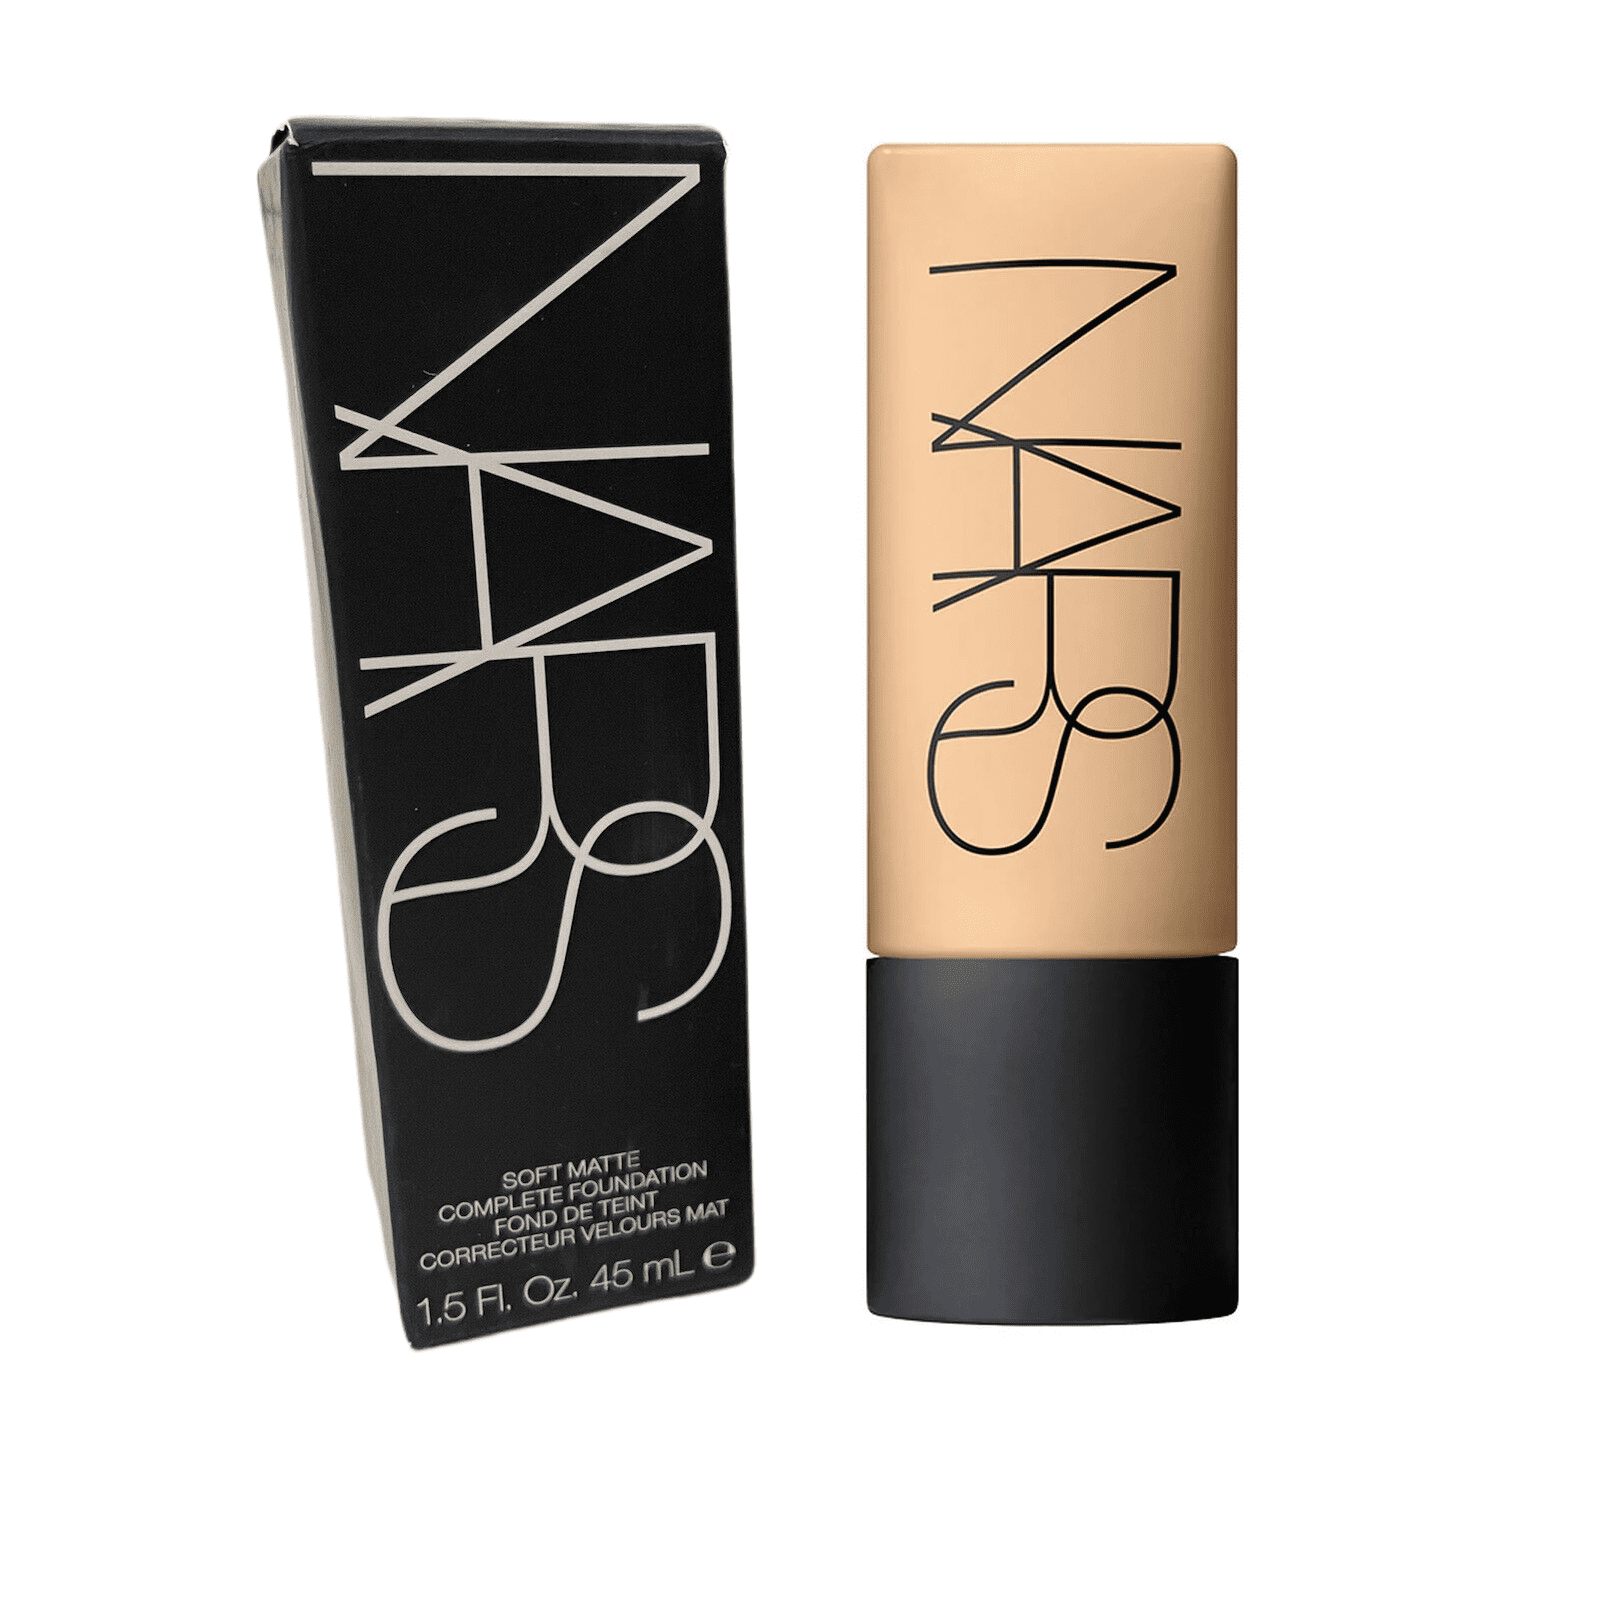 NARS Soft Matte Complete Foundation Review and 7-Hr Wear Test 